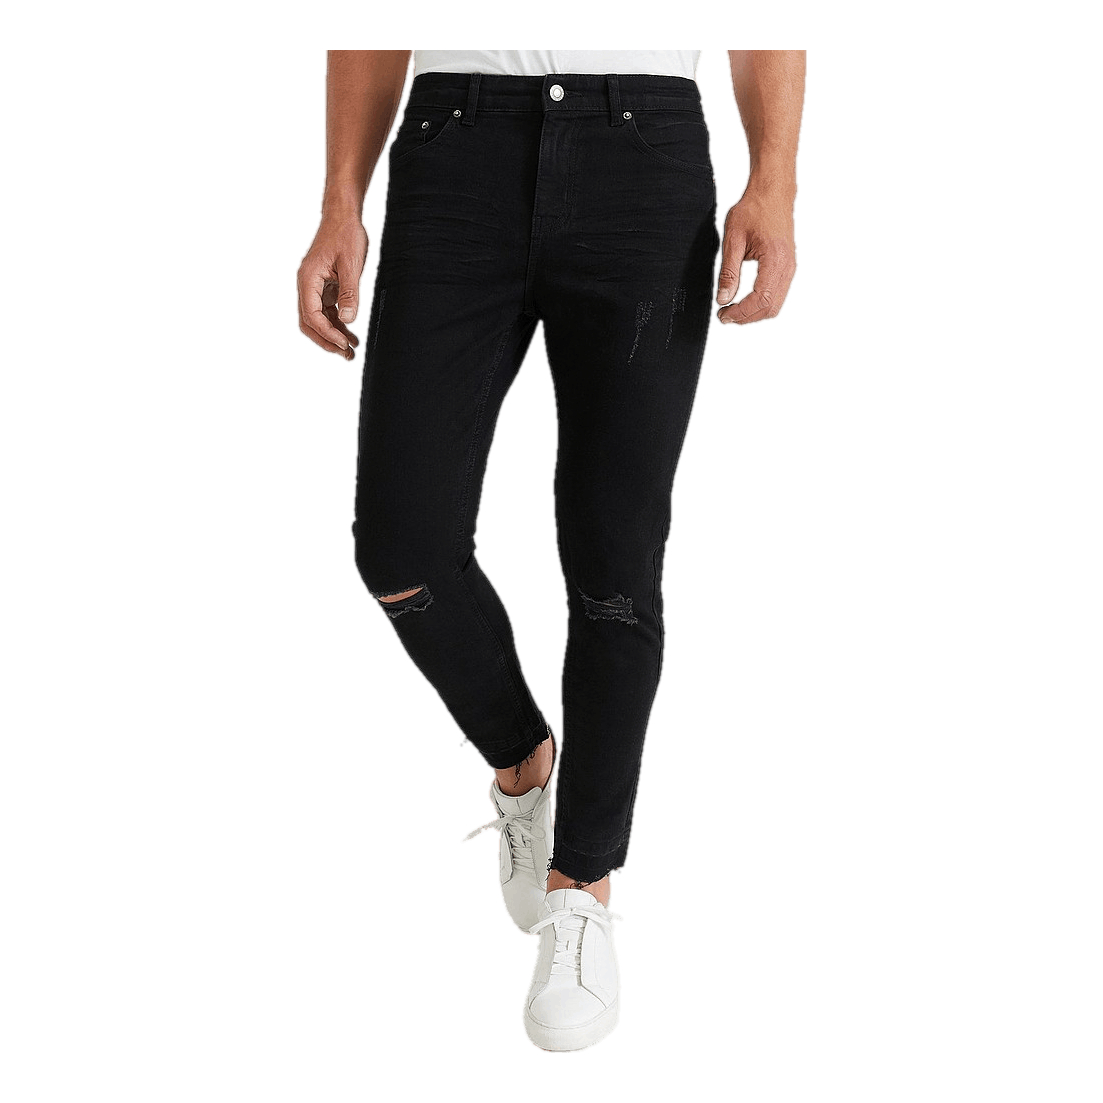 Toby Skinny Cropped Cut